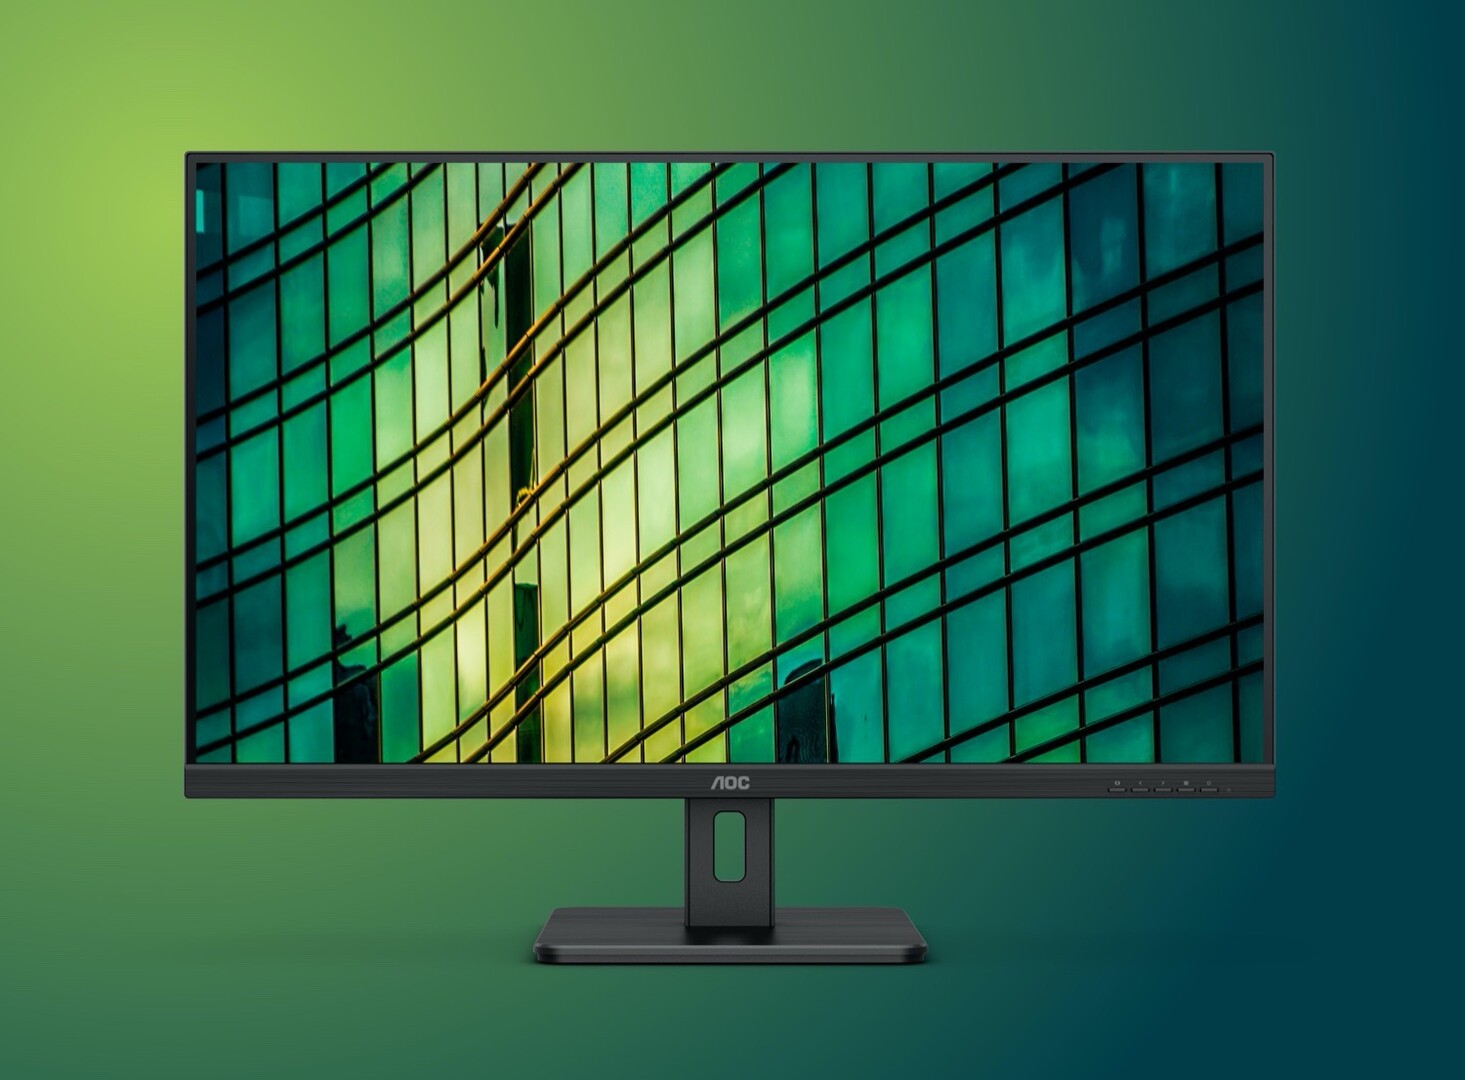 AOC unveils three new monitors with affordable 31.5-inch QHD, 31.5-inch 4K and 34-inch ultrawide